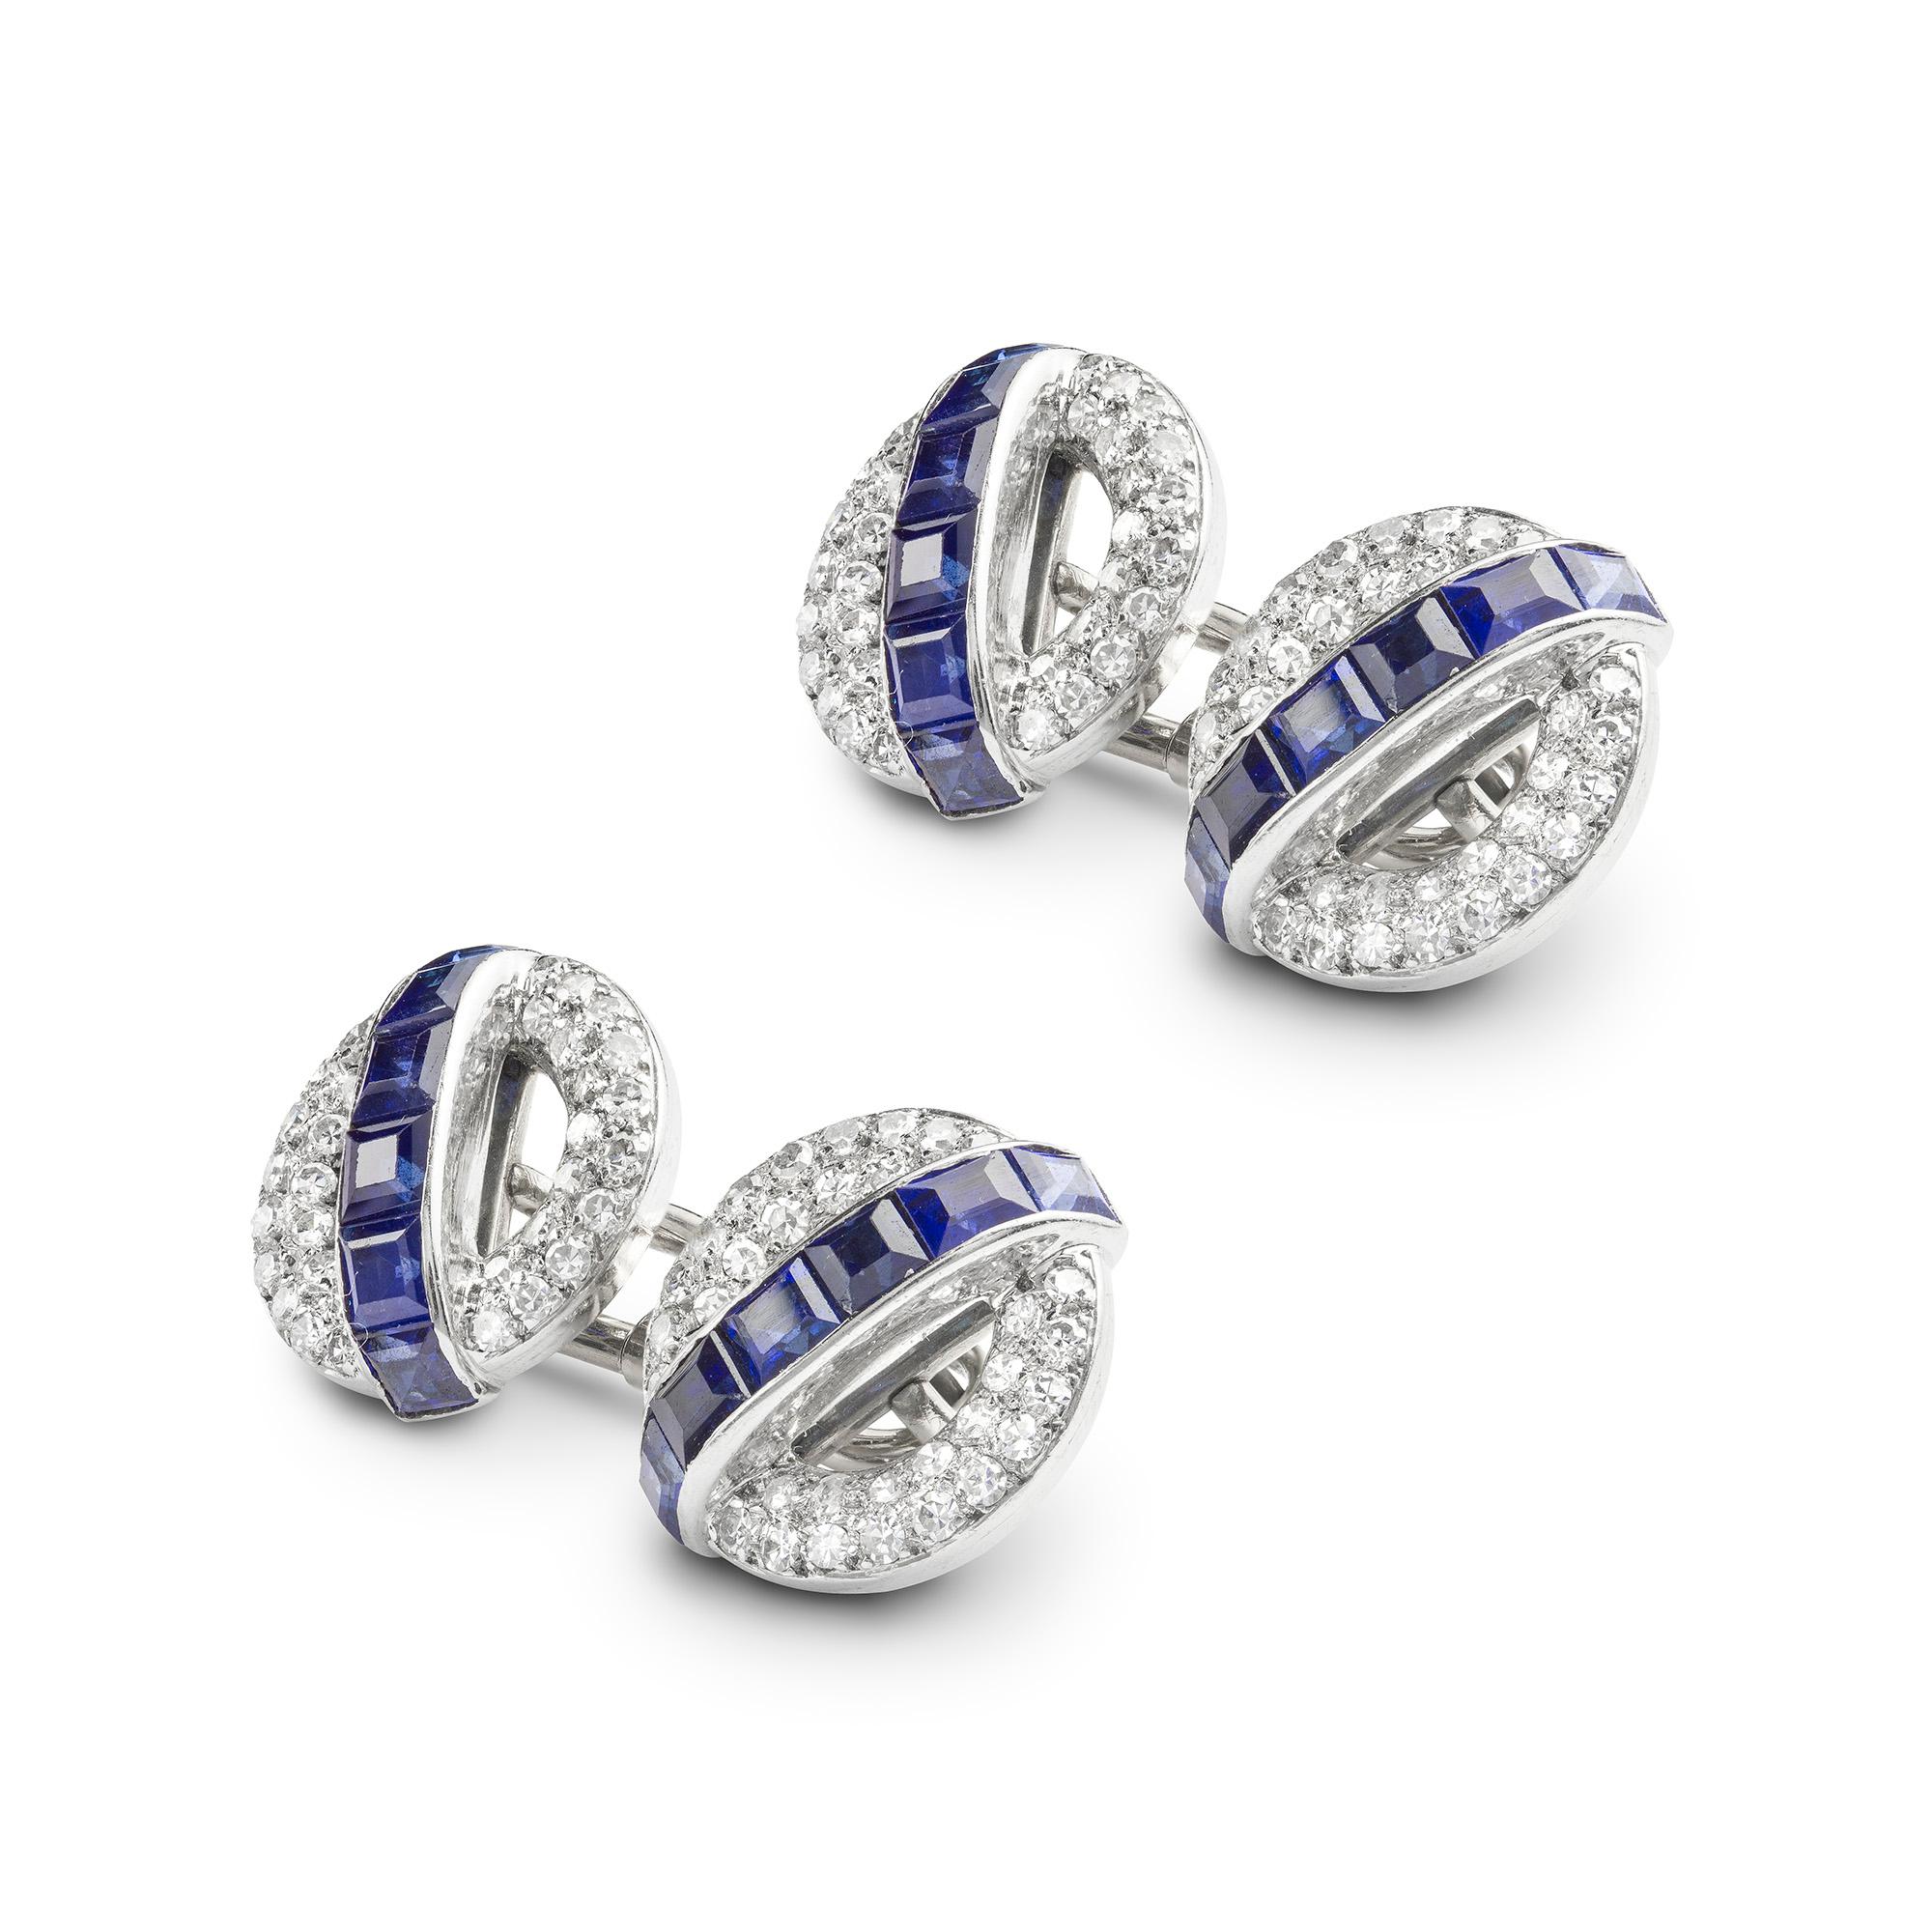 A pair of mid-20th century sapphire and diamond cufflinks, each link set with a central row of square cut sapphires estimated to weigh 4 carats in total, surrounded by a swiss-cut diamond pave-set circle, the diamonds estimated to weight 2.80 carats